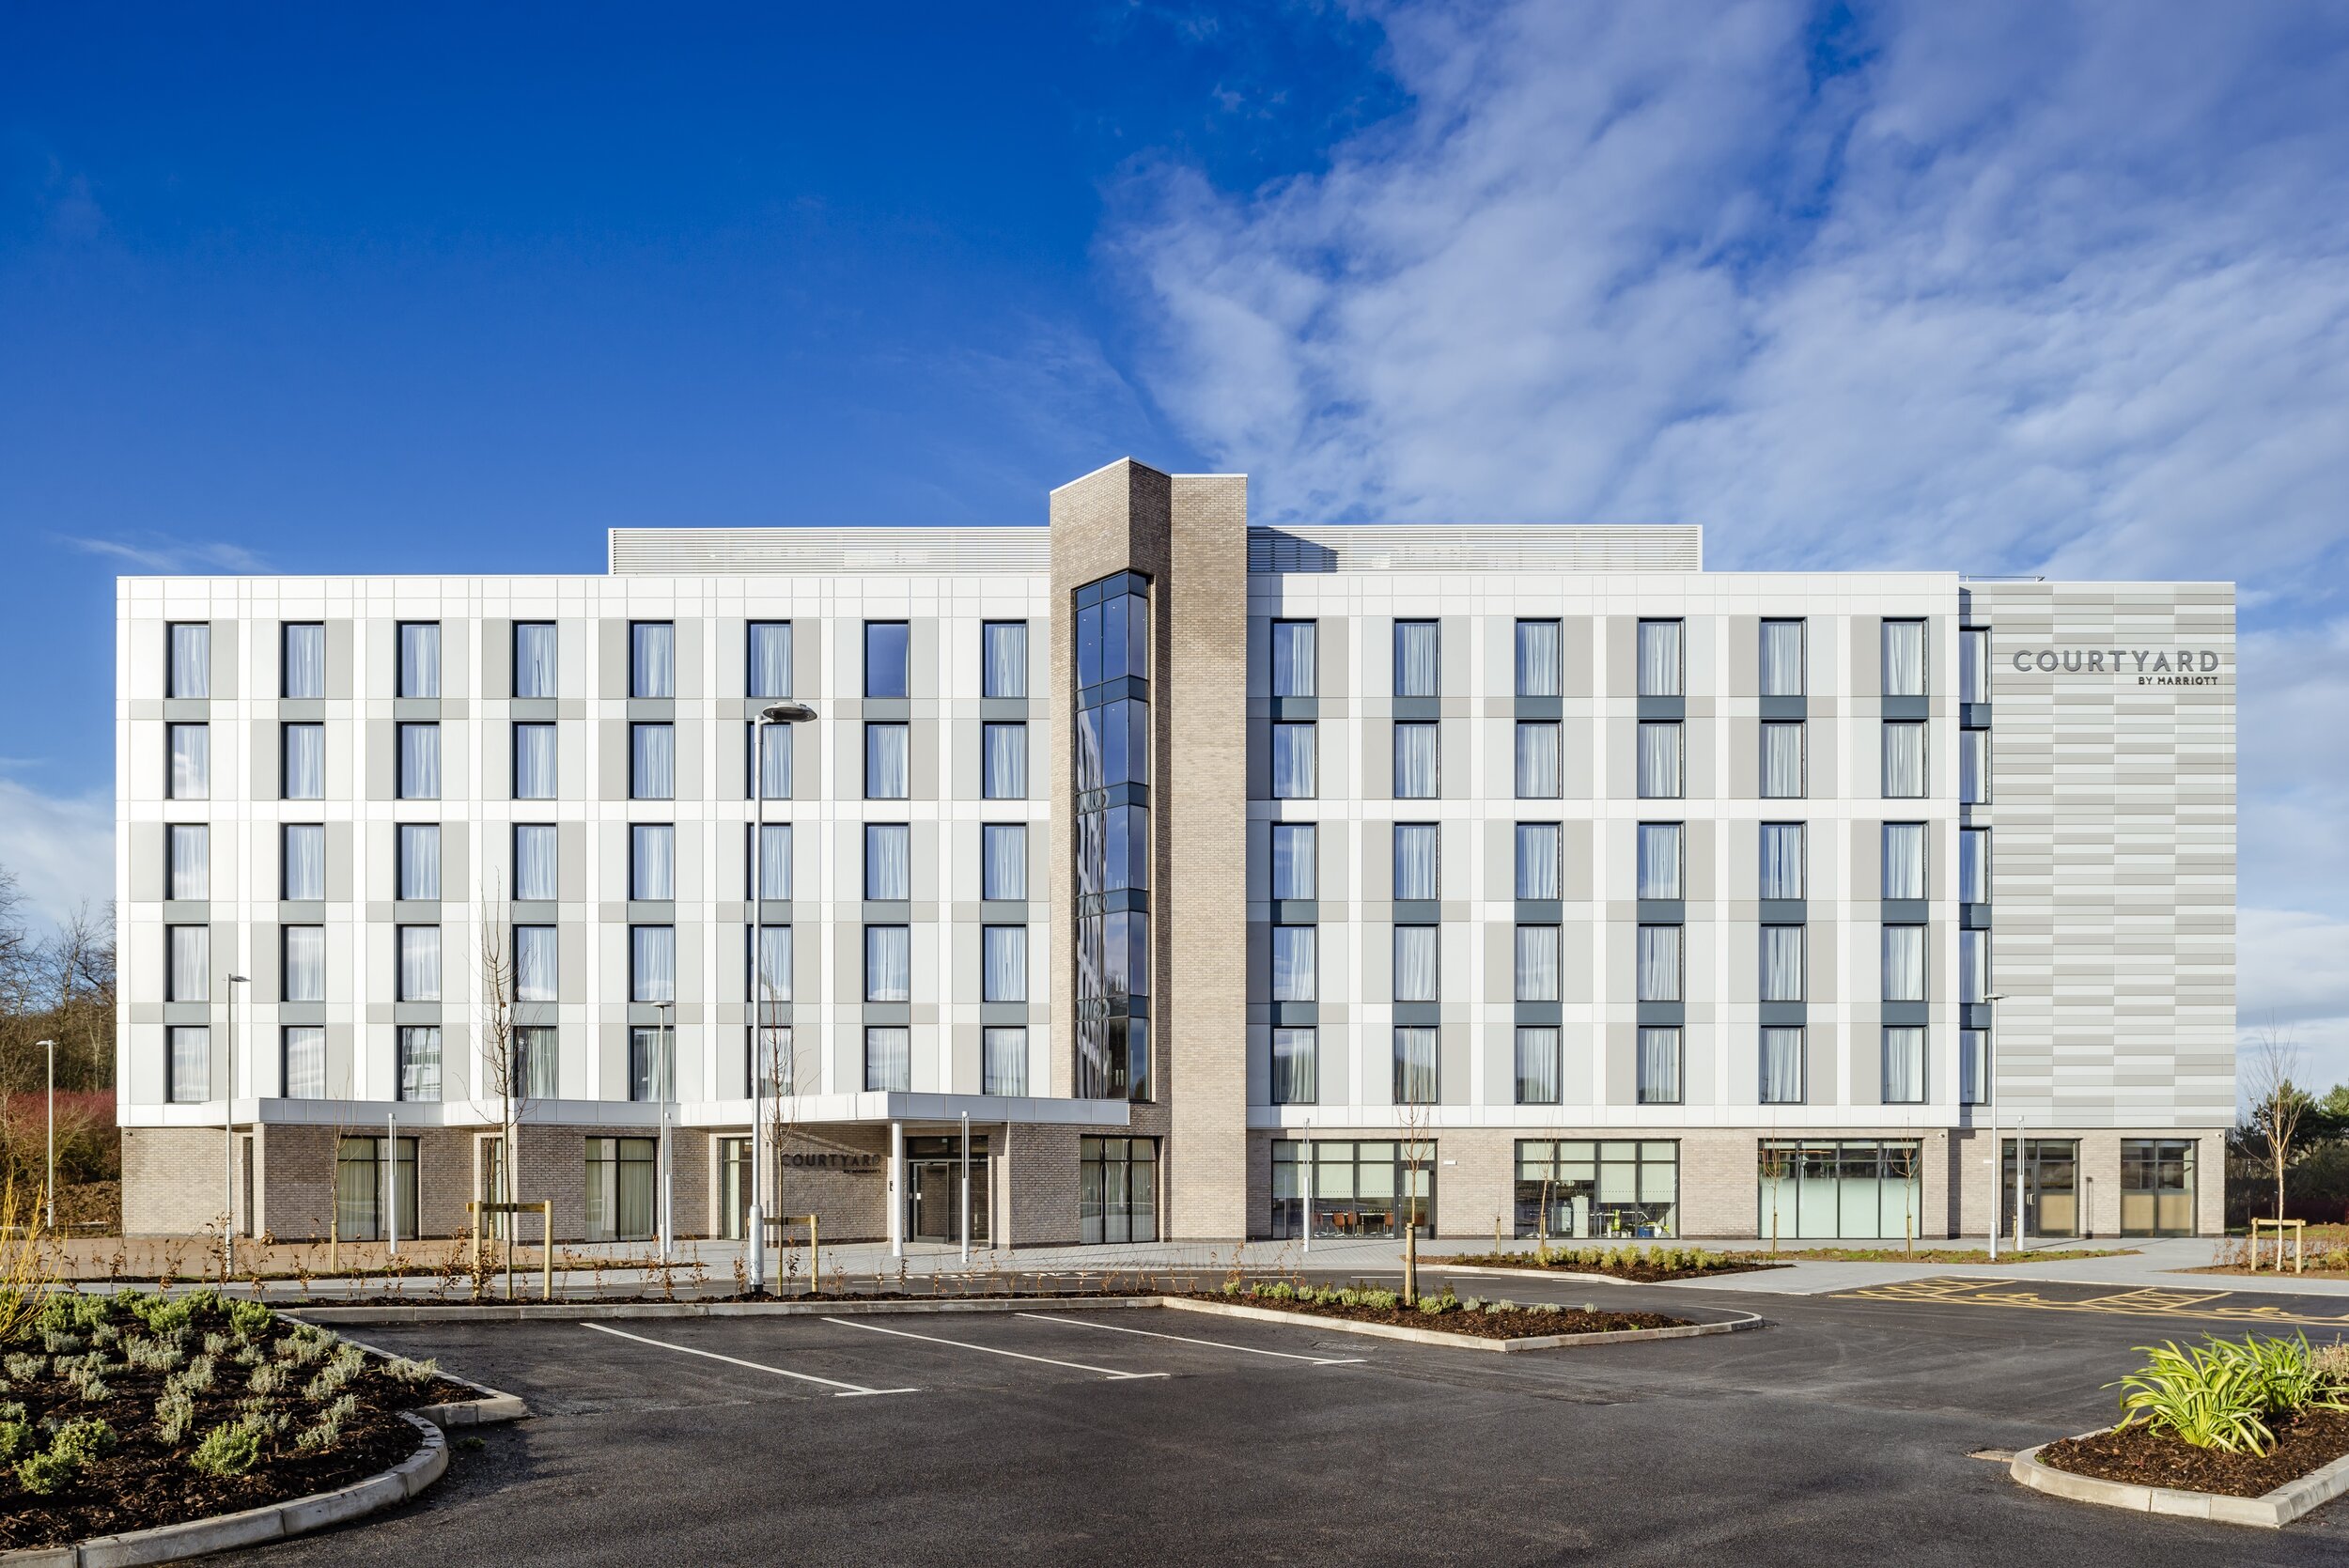 Courtyard by Marriott Keele Staffordshire opens its doors — Tower Hotel  Management